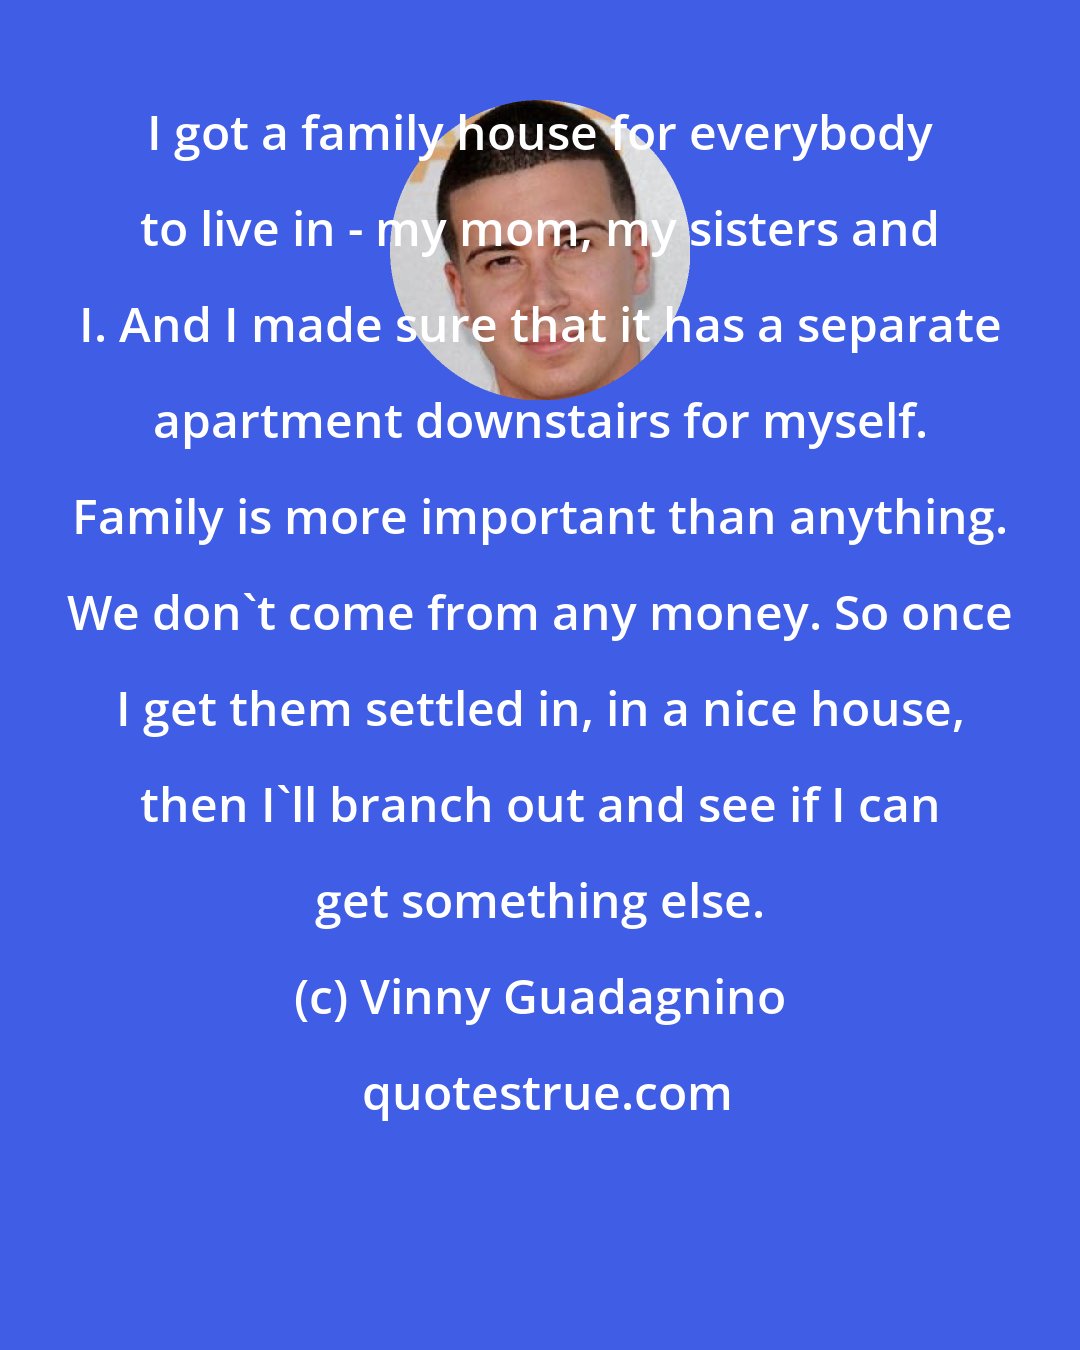 Vinny Guadagnino: I got a family house for everybody to live in - my mom, my sisters and I. And I made sure that it has a separate apartment downstairs for myself. Family is more important than anything. We don't come from any money. So once I get them settled in, in a nice house, then I'll branch out and see if I can get something else.